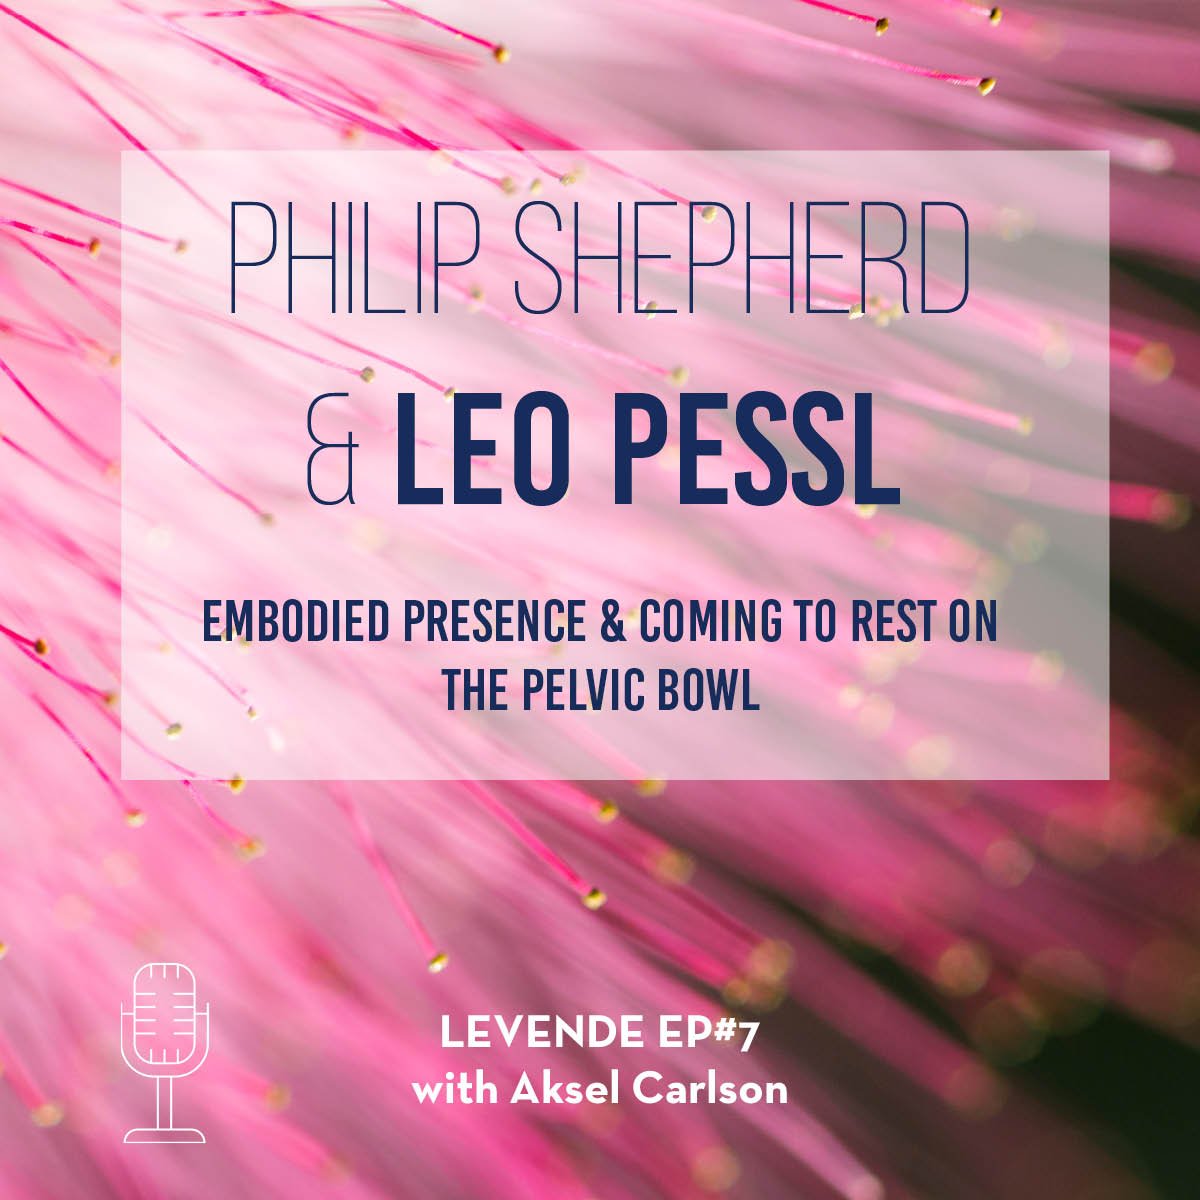 Philip Shepherd & Leo Pessl: Embodied Presence & Coming To Rest On The Pelvic Bowl - The Embodied Present Process